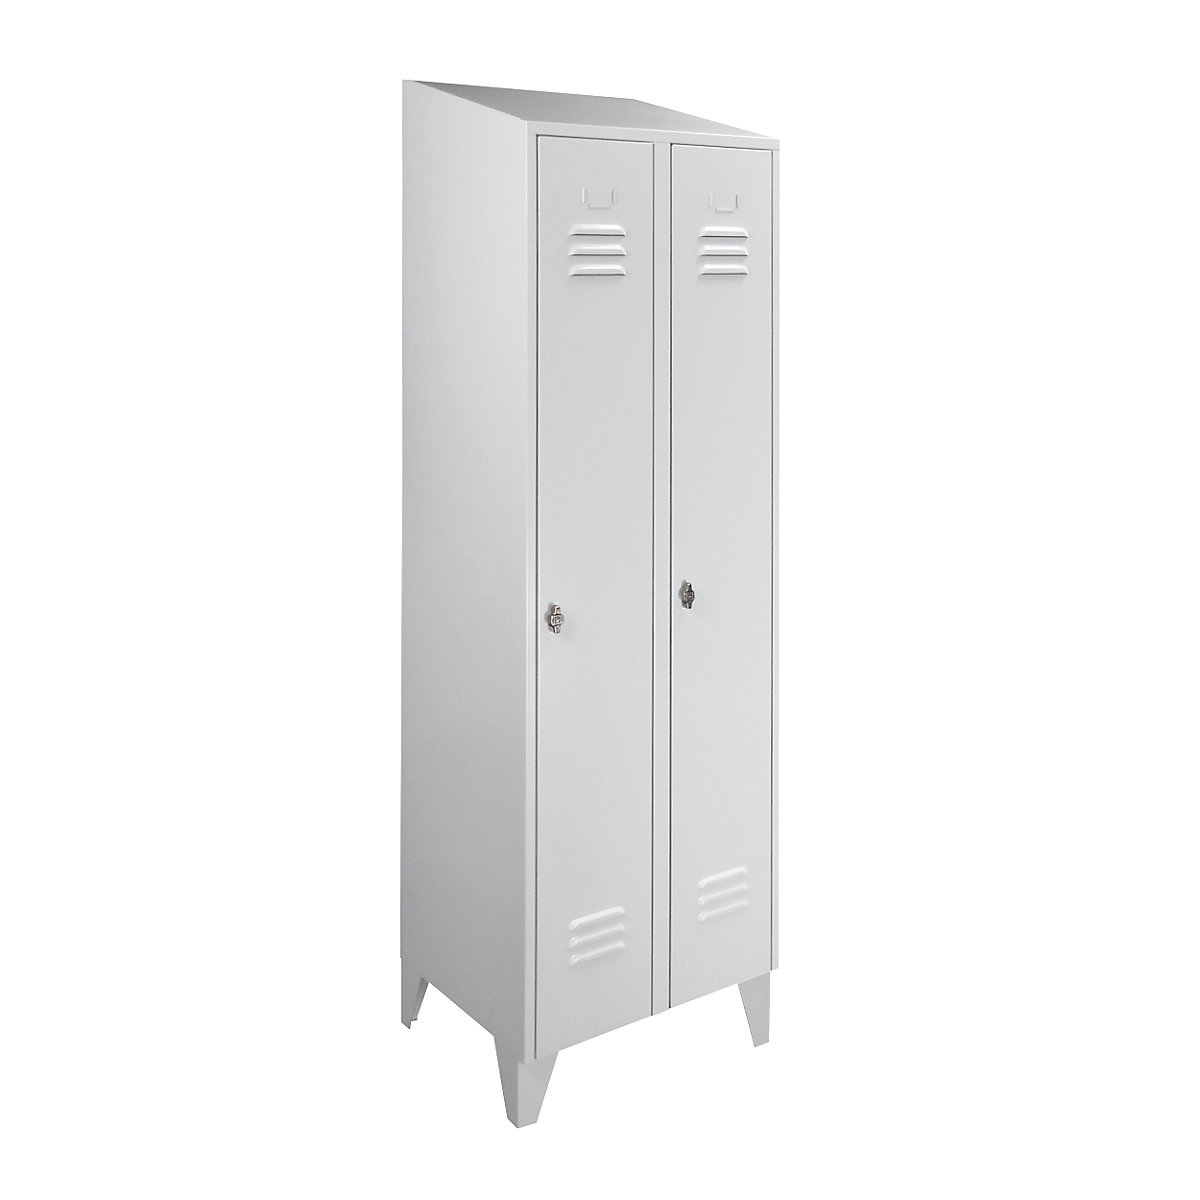 Steel cupboard with sloping top, full height compartments - Wolf